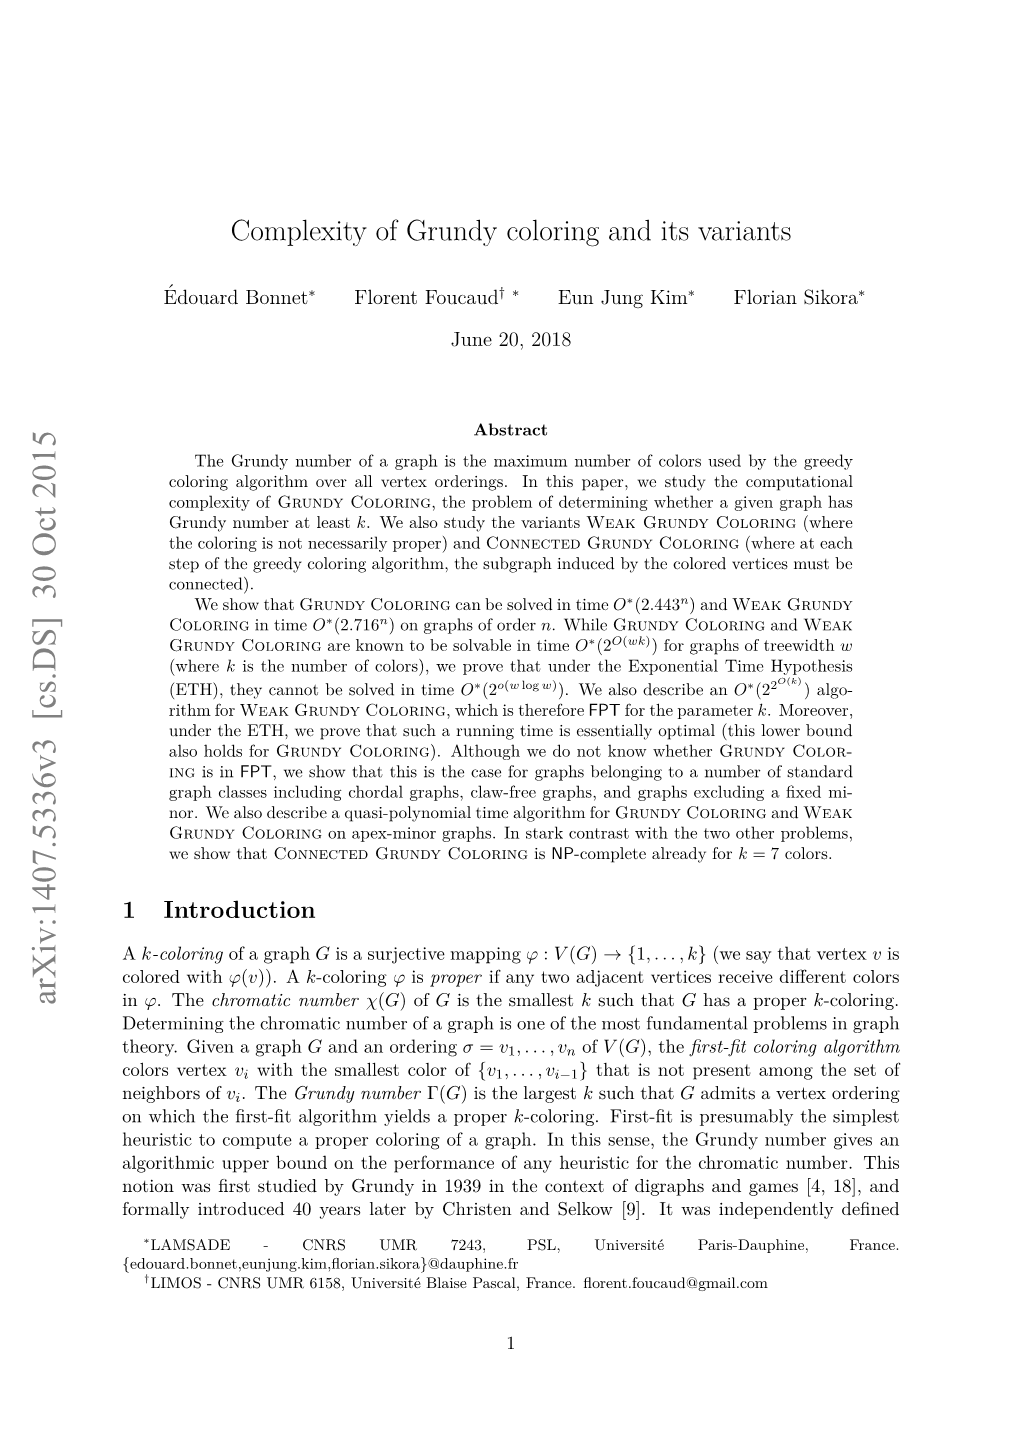 Complexity of Grundy Coloring and Its Variants